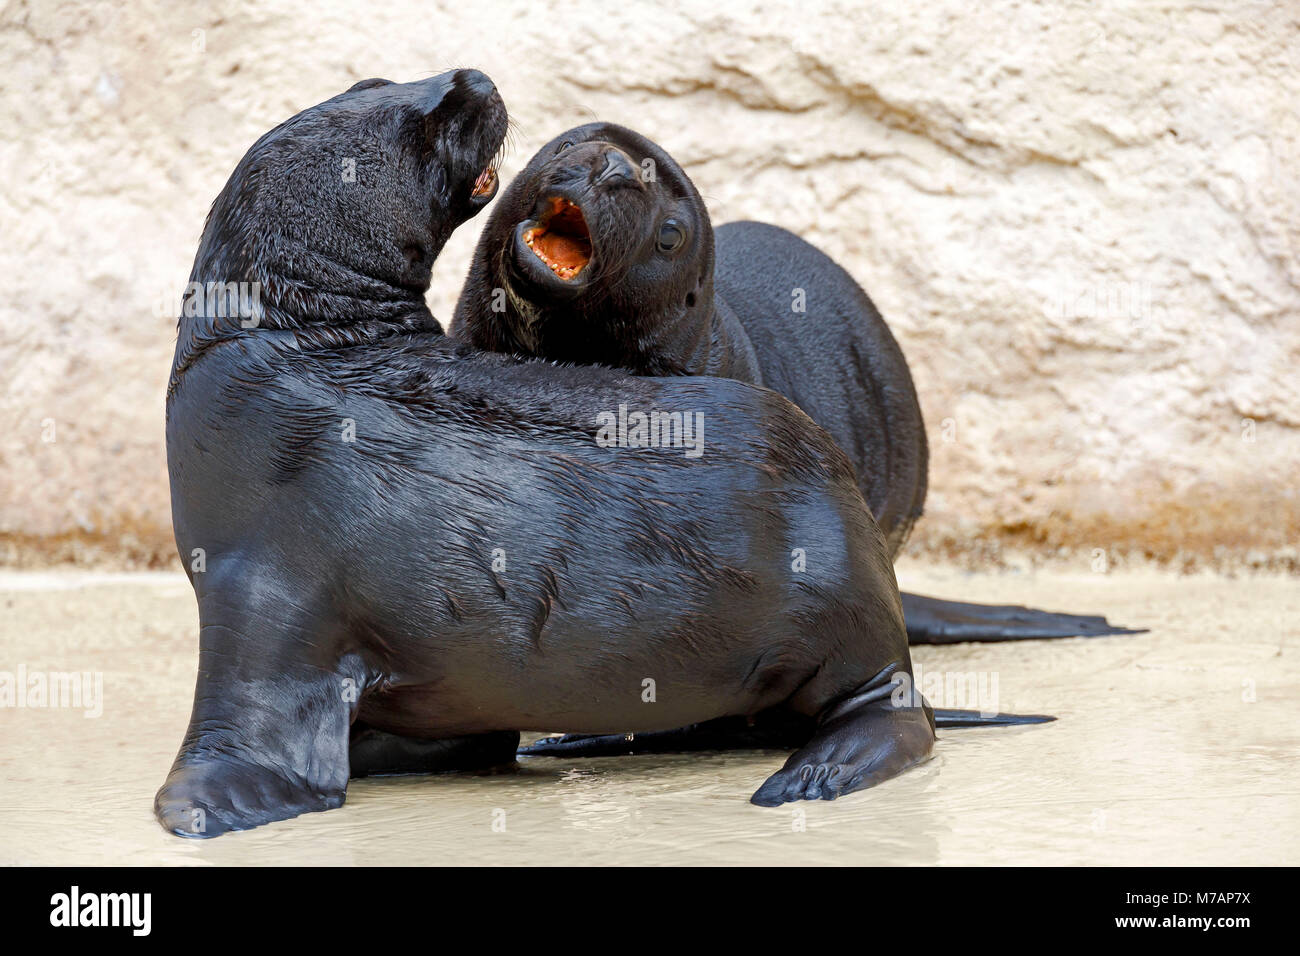 southern sea lion, (Otaria flavescens), young animals, captive, Stock Photo